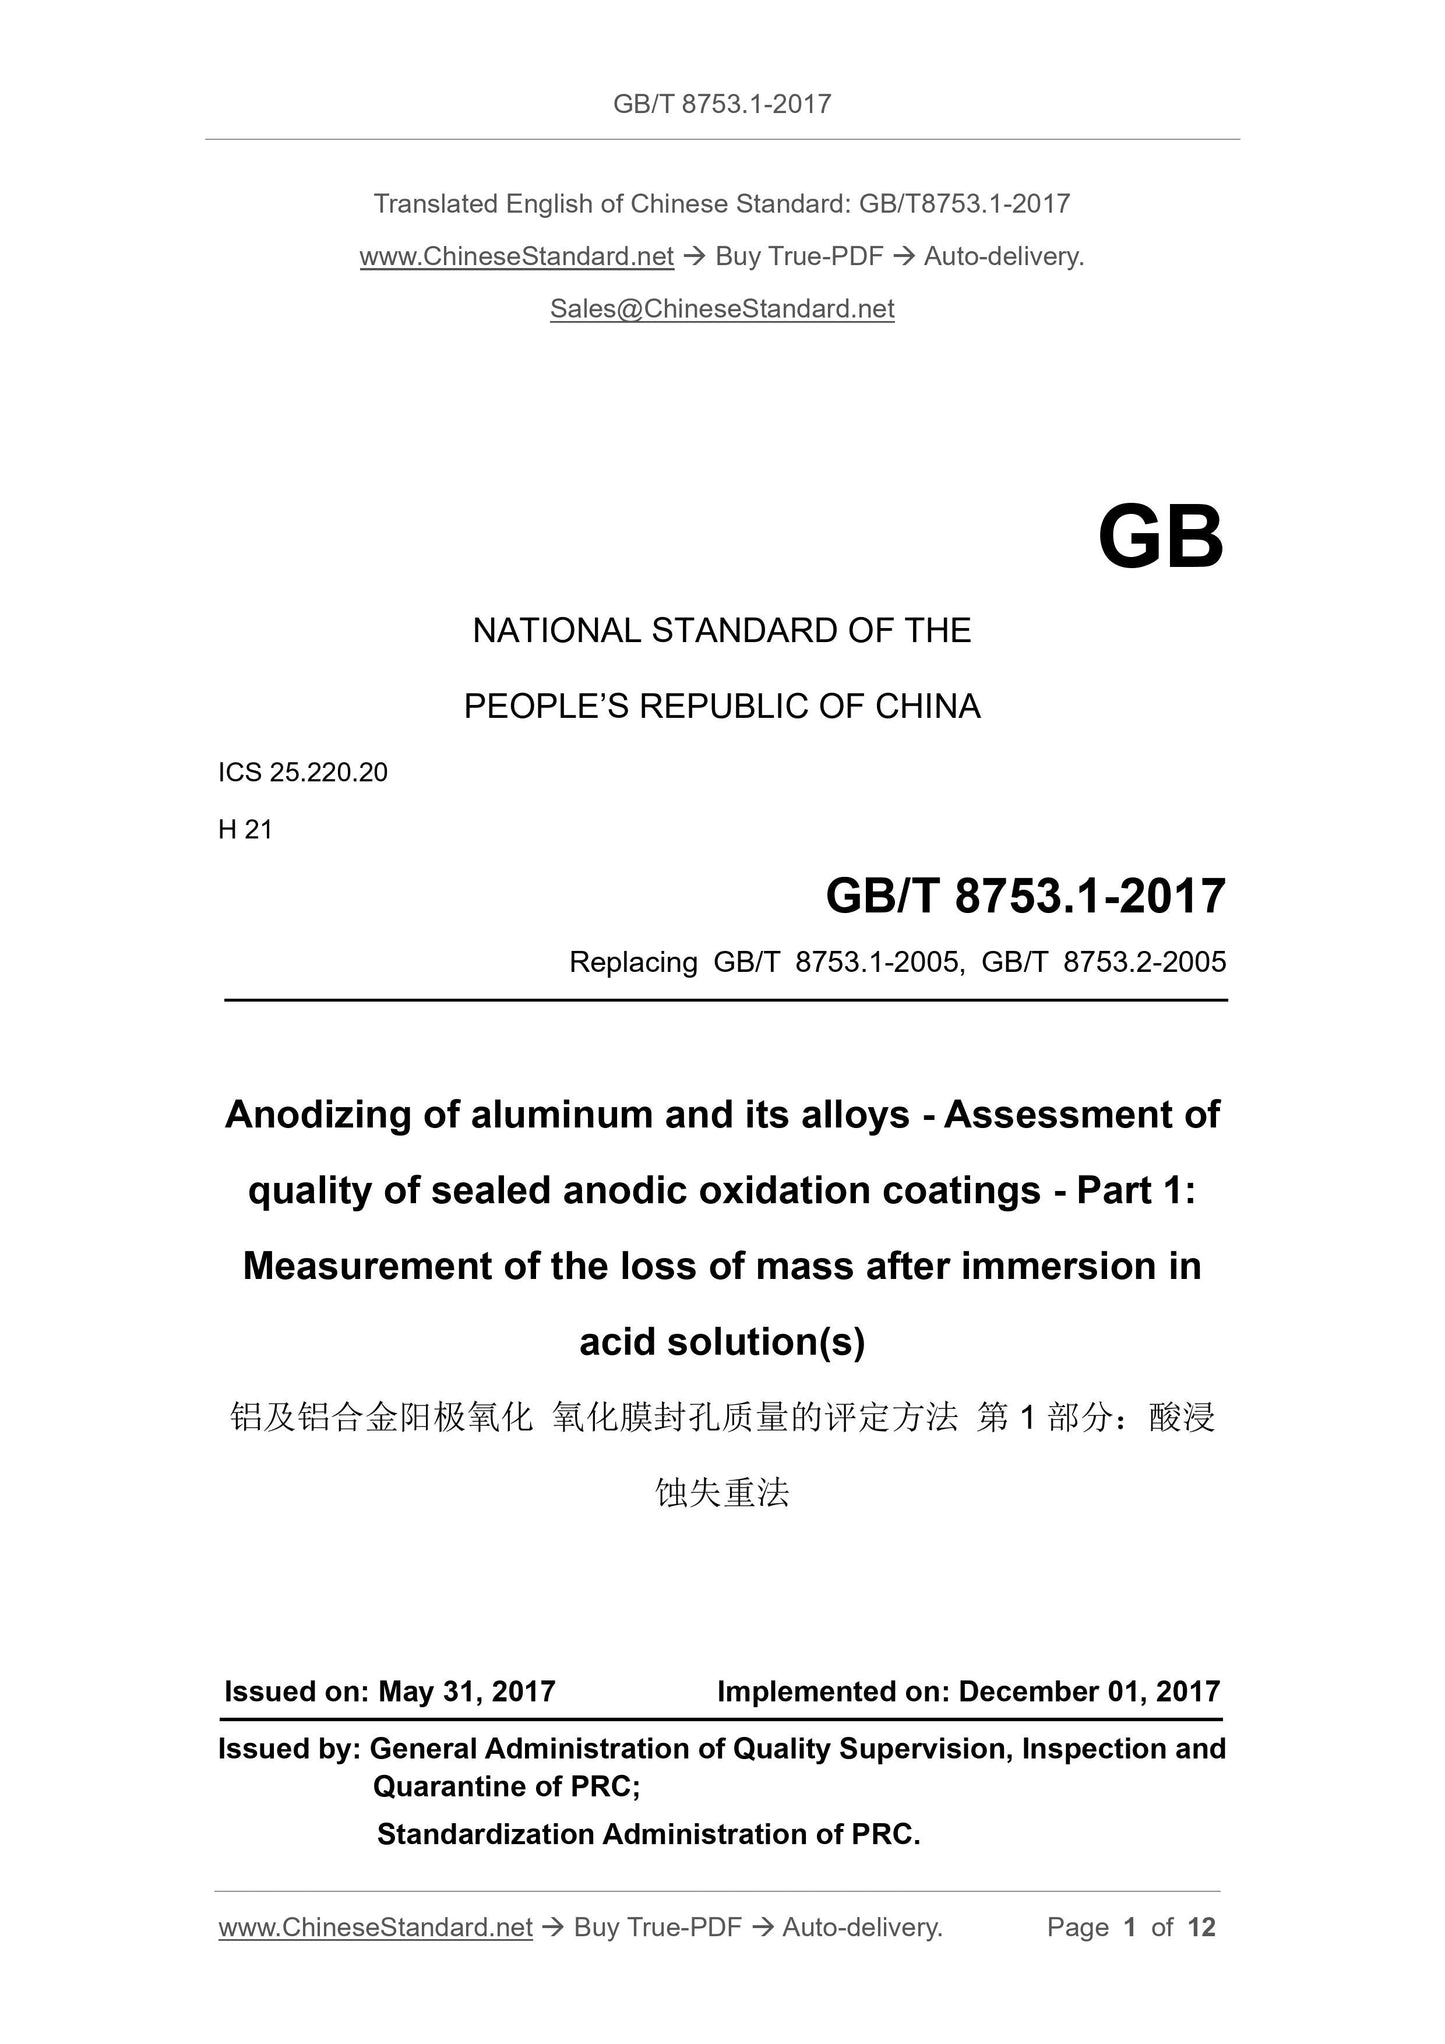 GB/T 8753.1-2017 Page 1